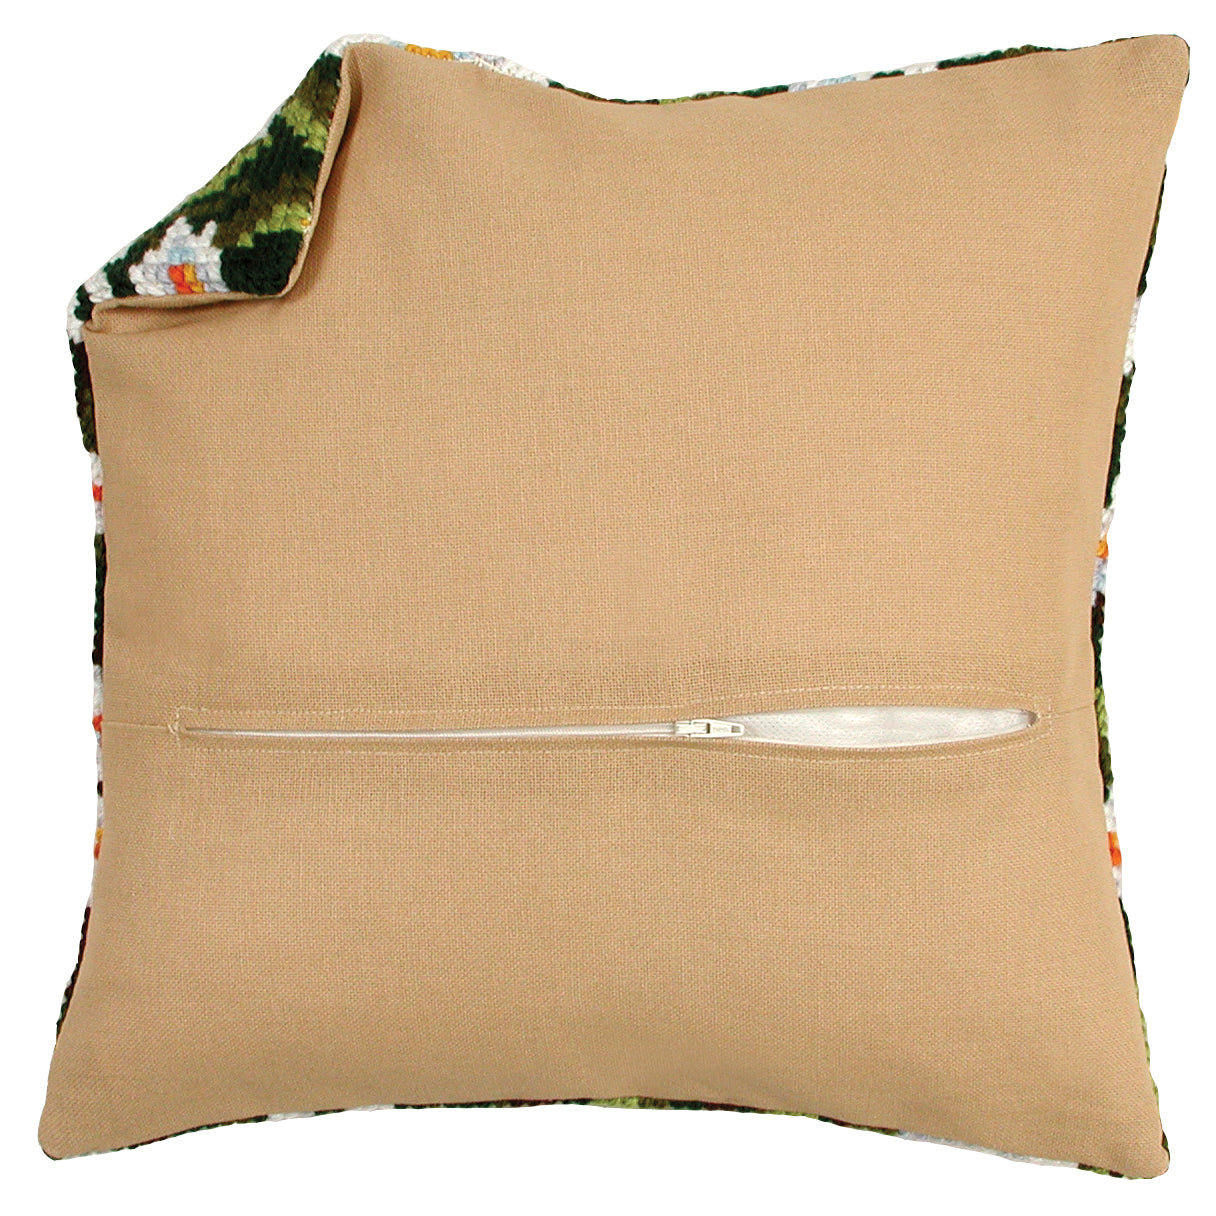 Cushion Back with Zipper 45 x 45cm or 18 x 18 inches Vervaco